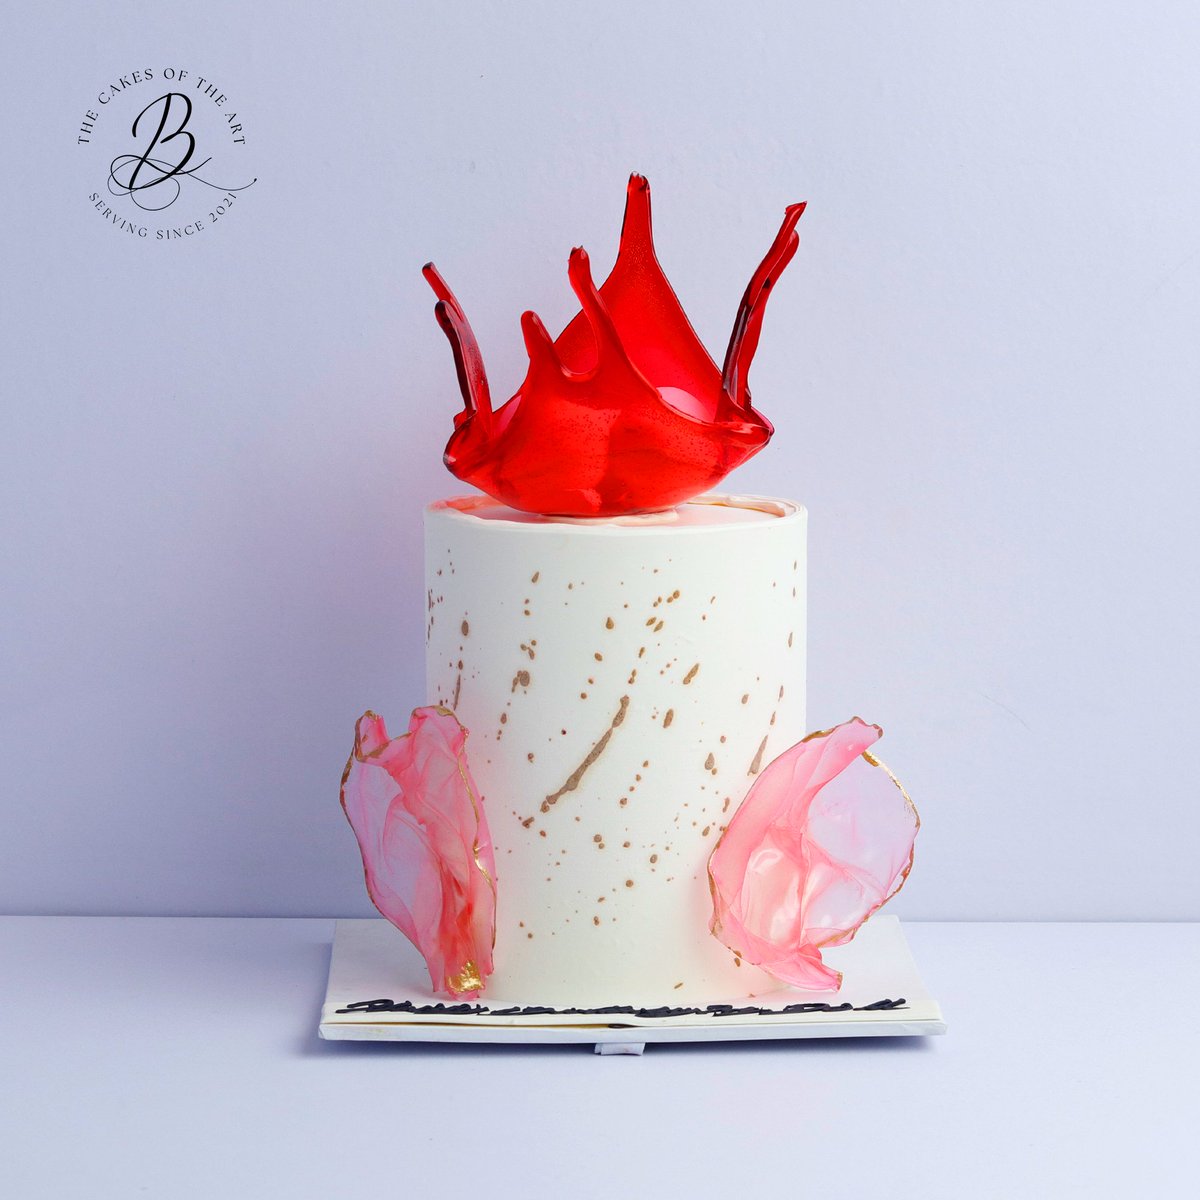 'Indulge in perfection with our Pink x Red Sail Birthday Cake - the best cake in Dhaka! 📷📷 Order Now for a celebration like no other. #CakePerfection #SpecialtyBakery'
visit: borsalle.com
#cakeindhaka #cakedecorating #cakedesign #cakelover